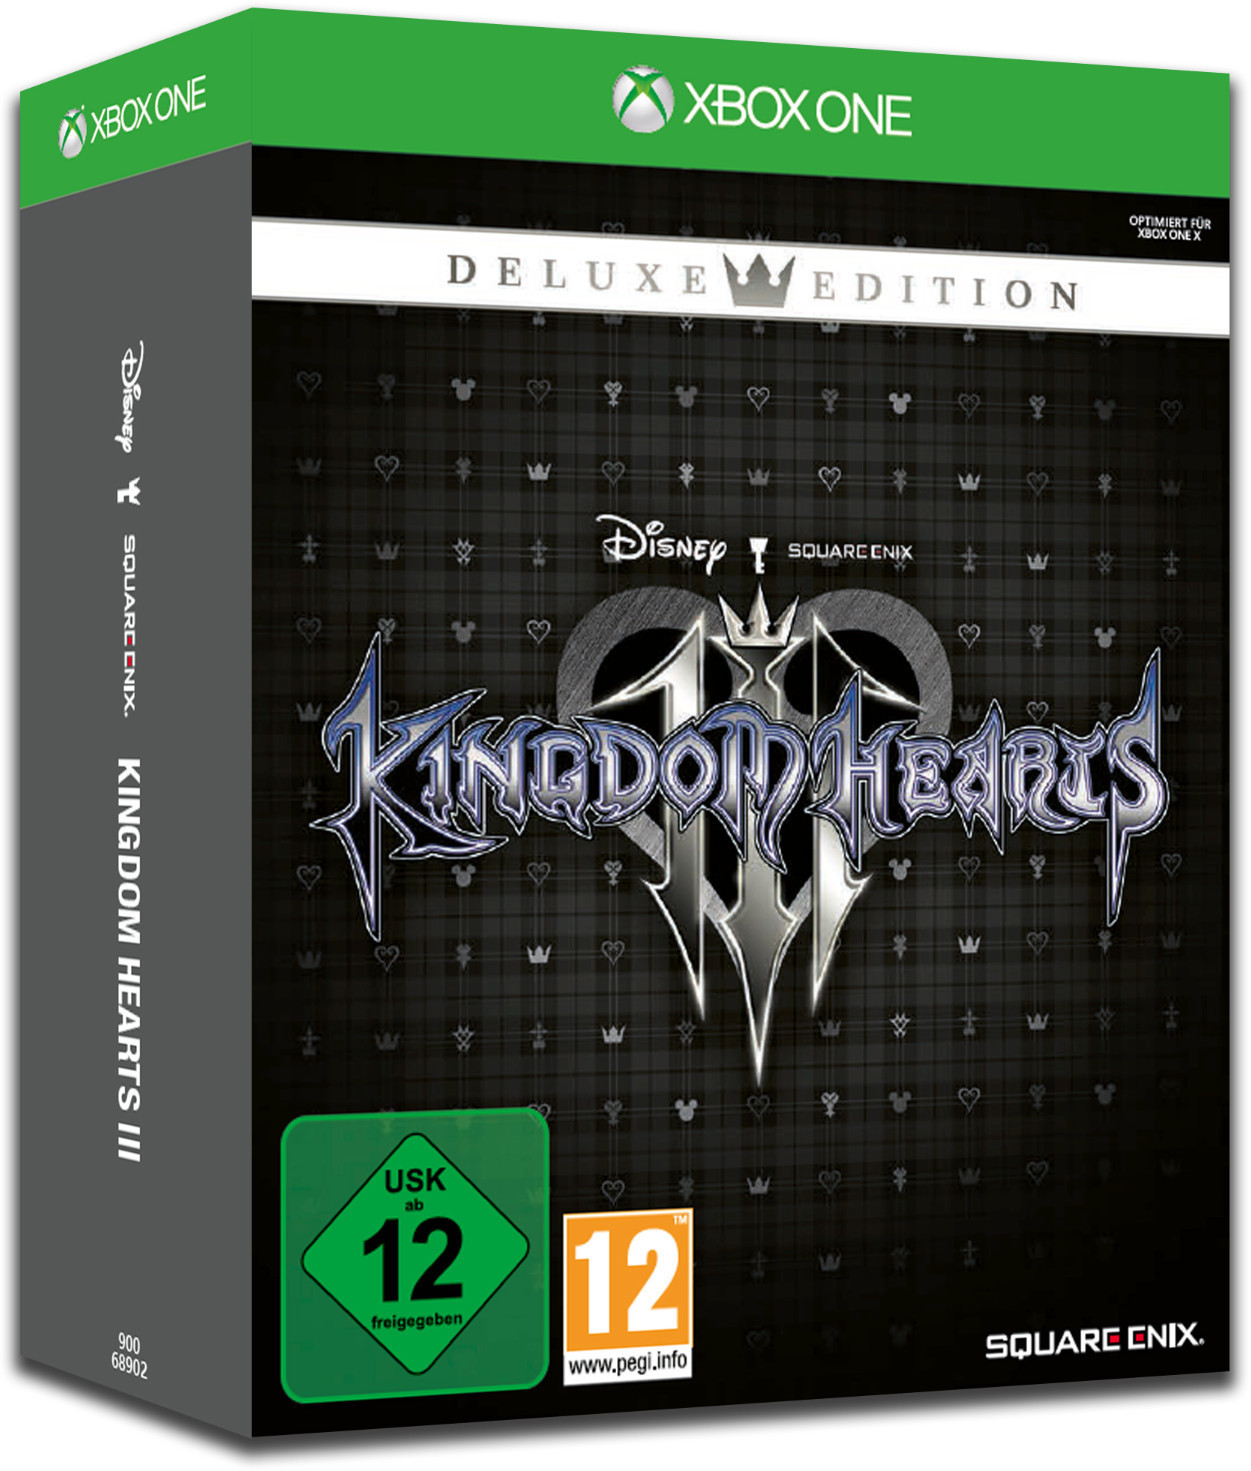 kingdom hearts 3 deluxe edition comes with 2 cases and 1 game